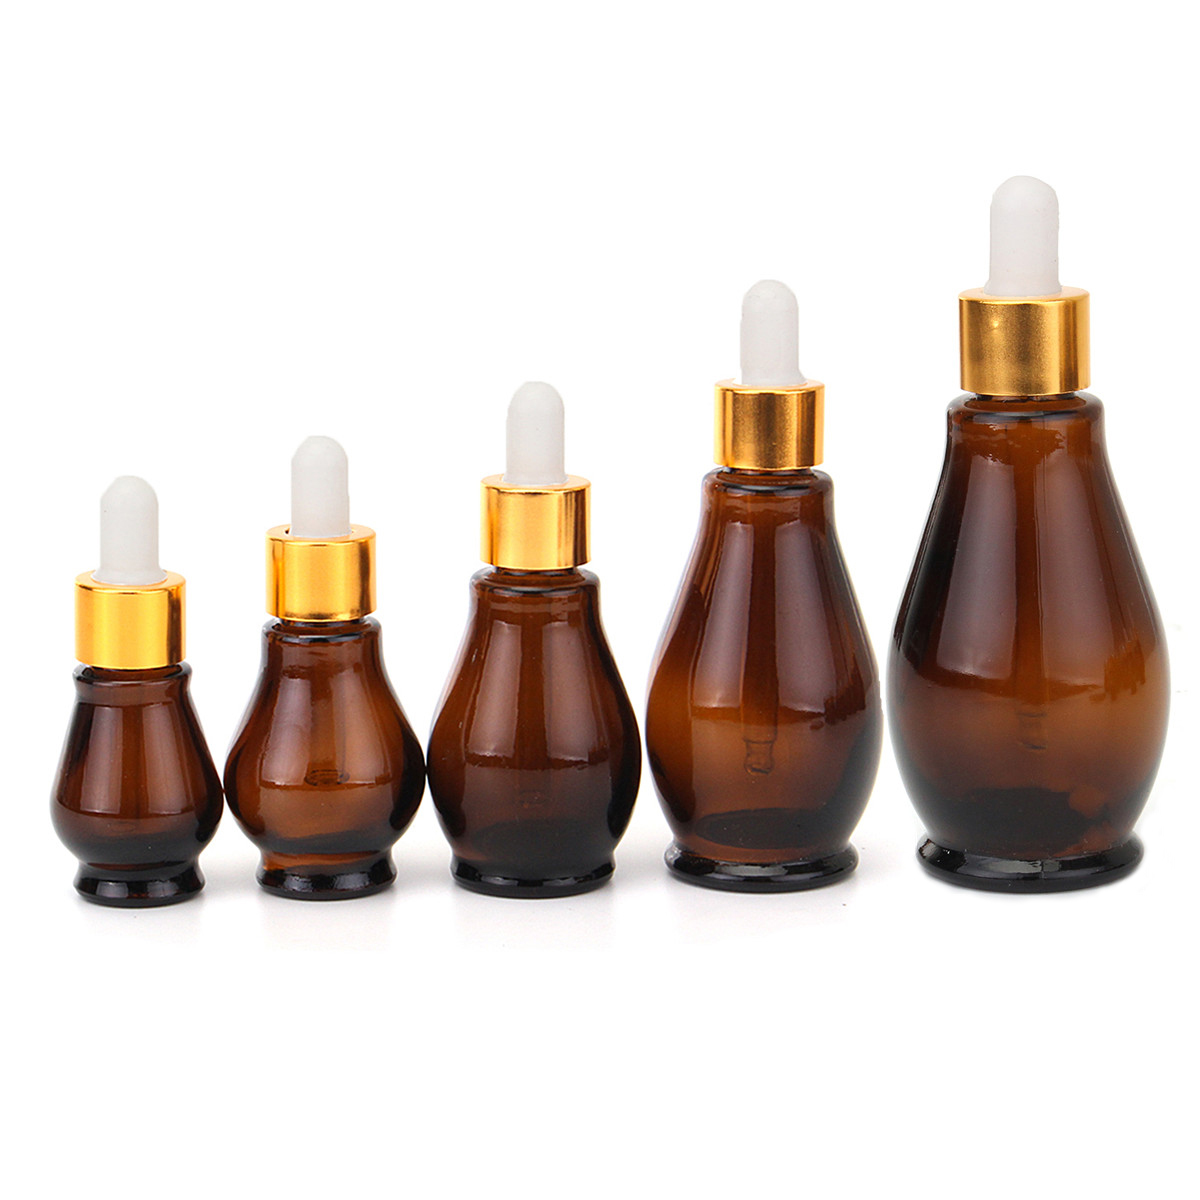 5Pcs-Amber-Glass-Pipette-Eye-Dropper-Bottles-for-Aromatherapy-Essential-Oil-Perfume-Toner-1276237-5